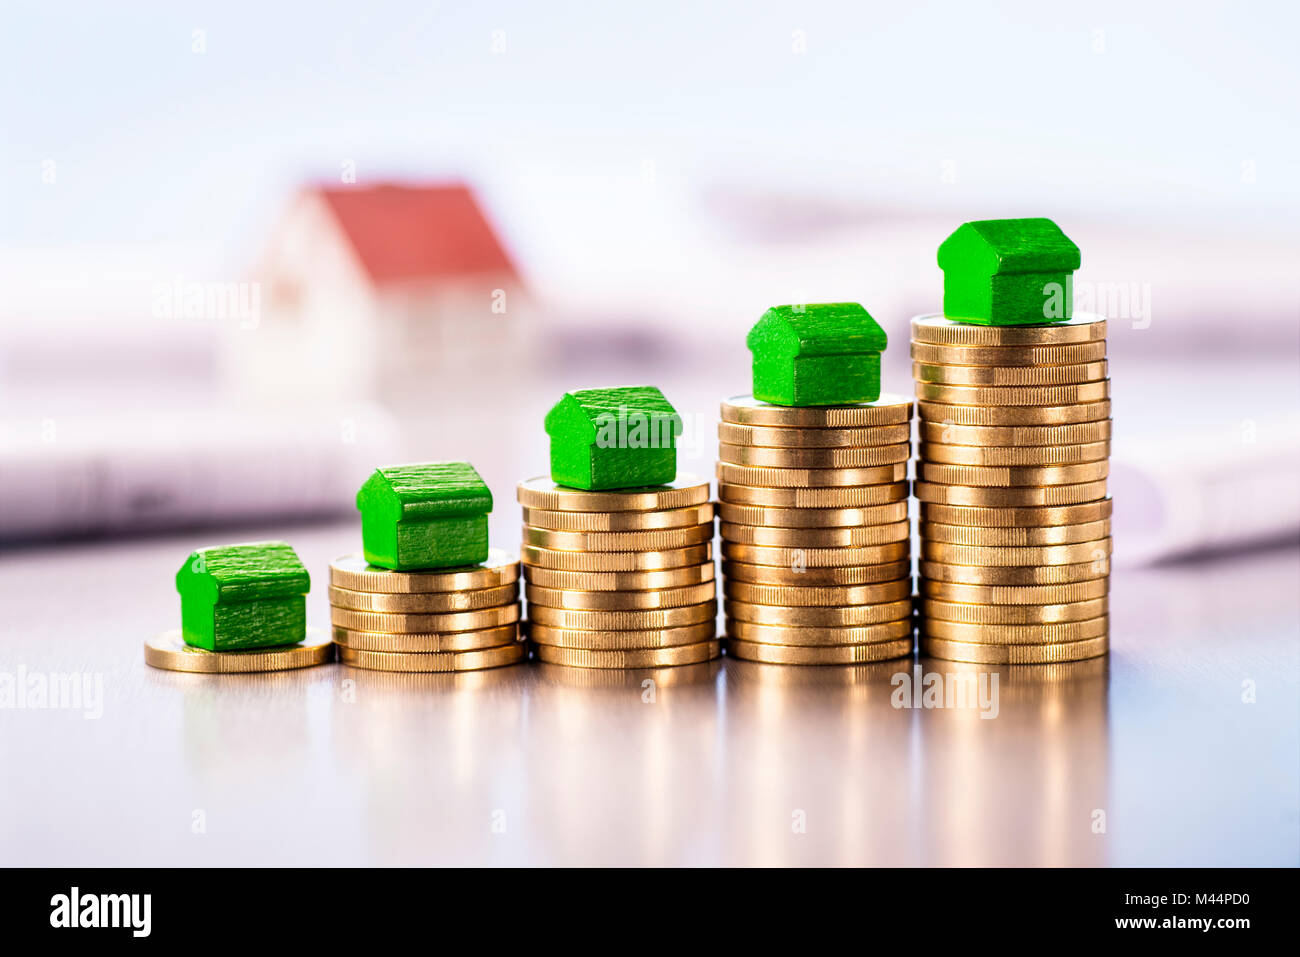 Small green houses standing on stacks of coins with blueprints and architectural model in the background. Stock Photo